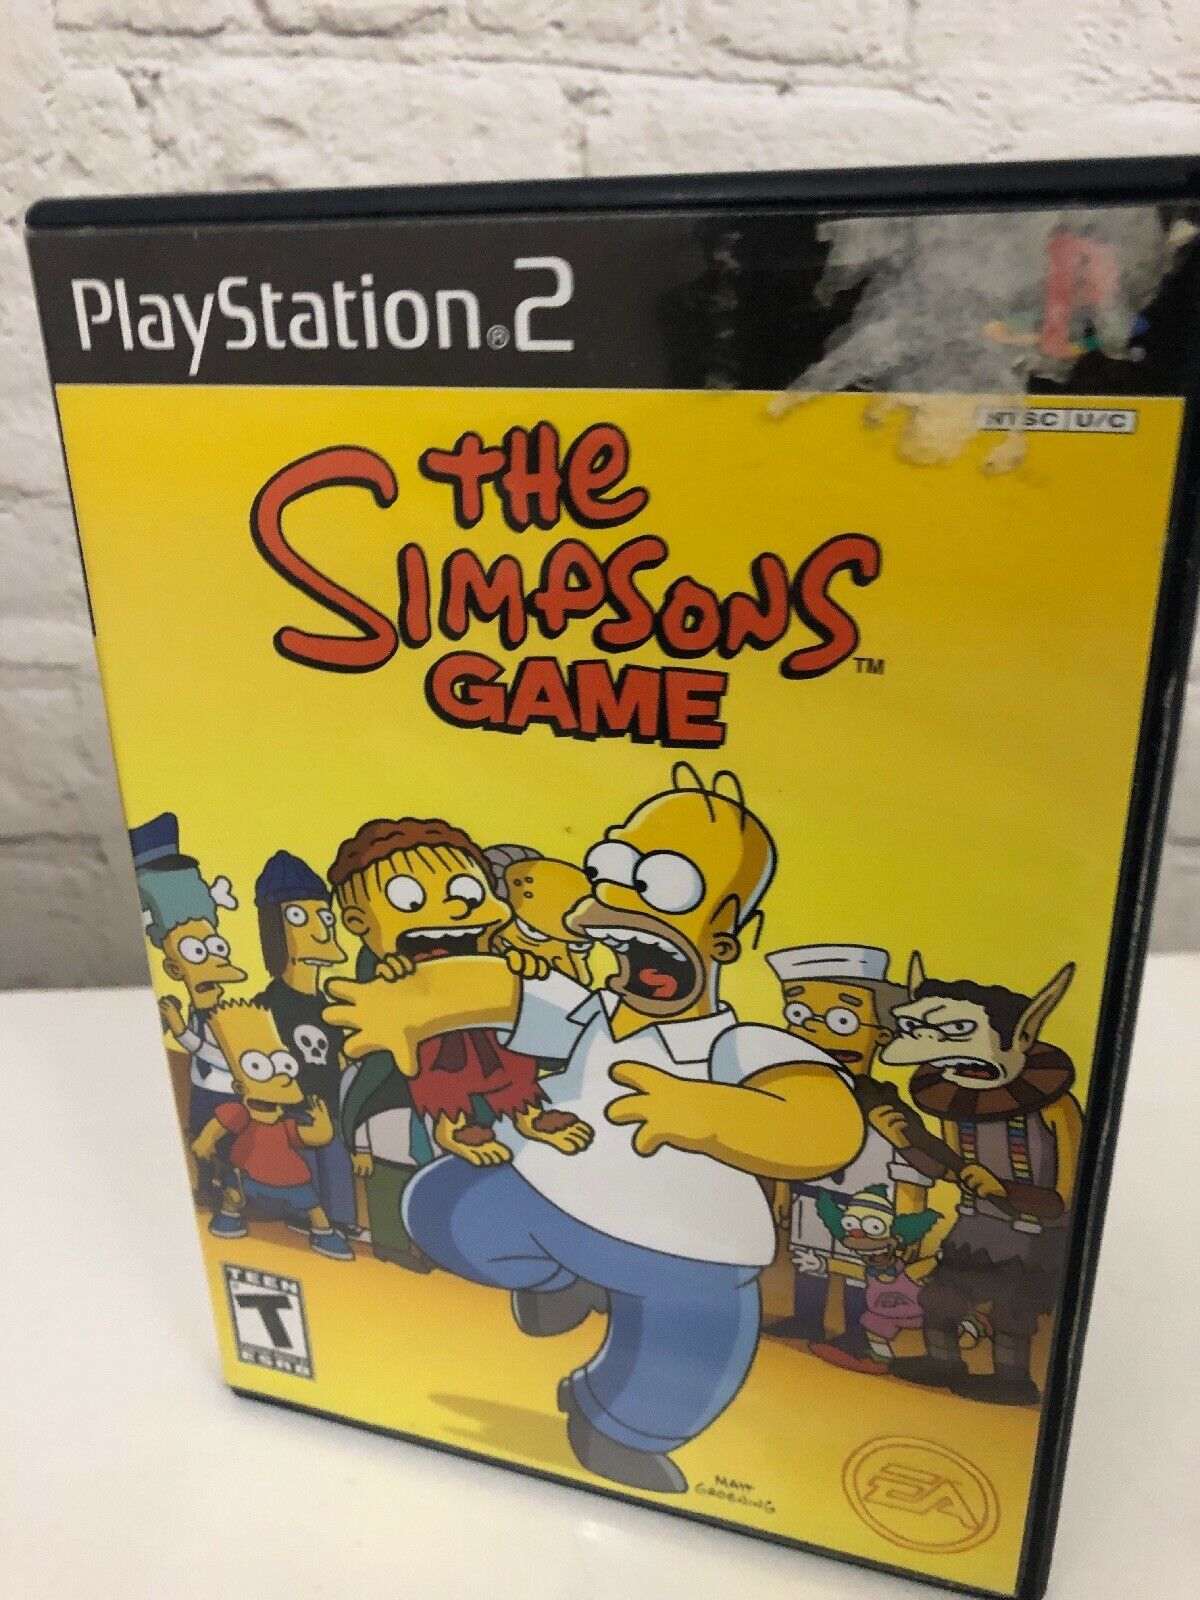 the simpsons 2007 game pc download